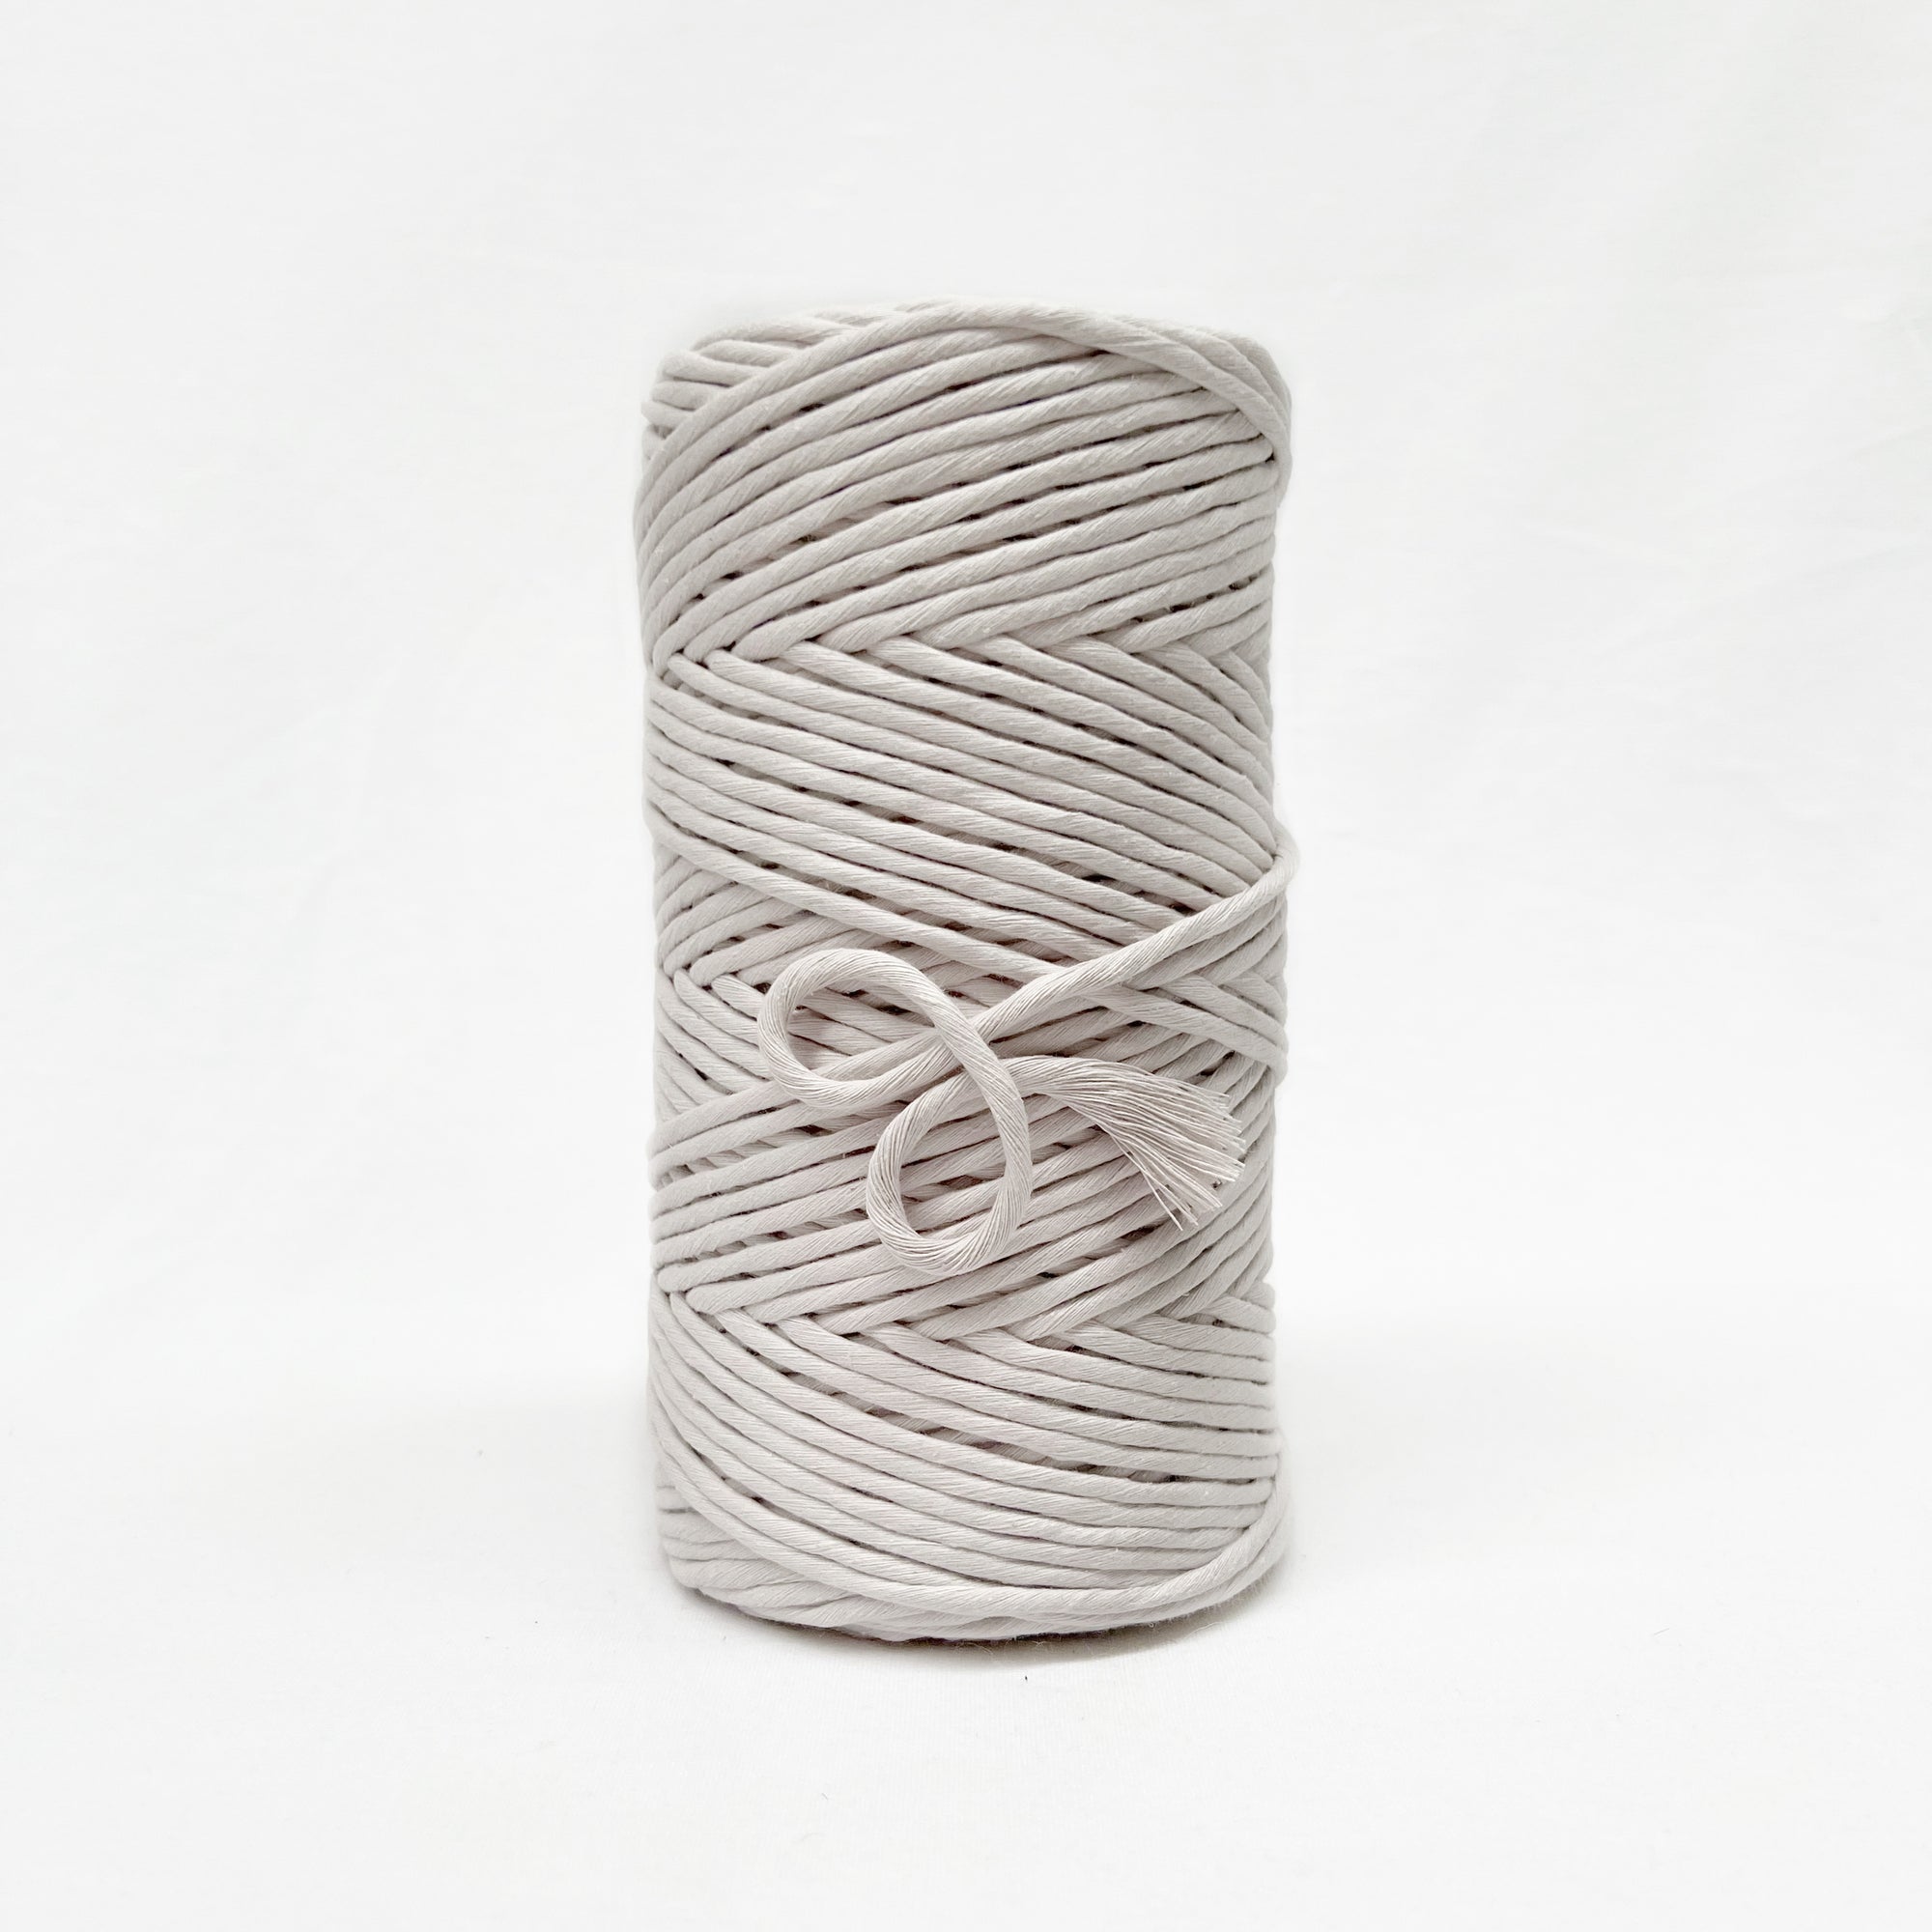 5mm ivory coloured macrame string with soft end brushed out showing individual lengths of fibre